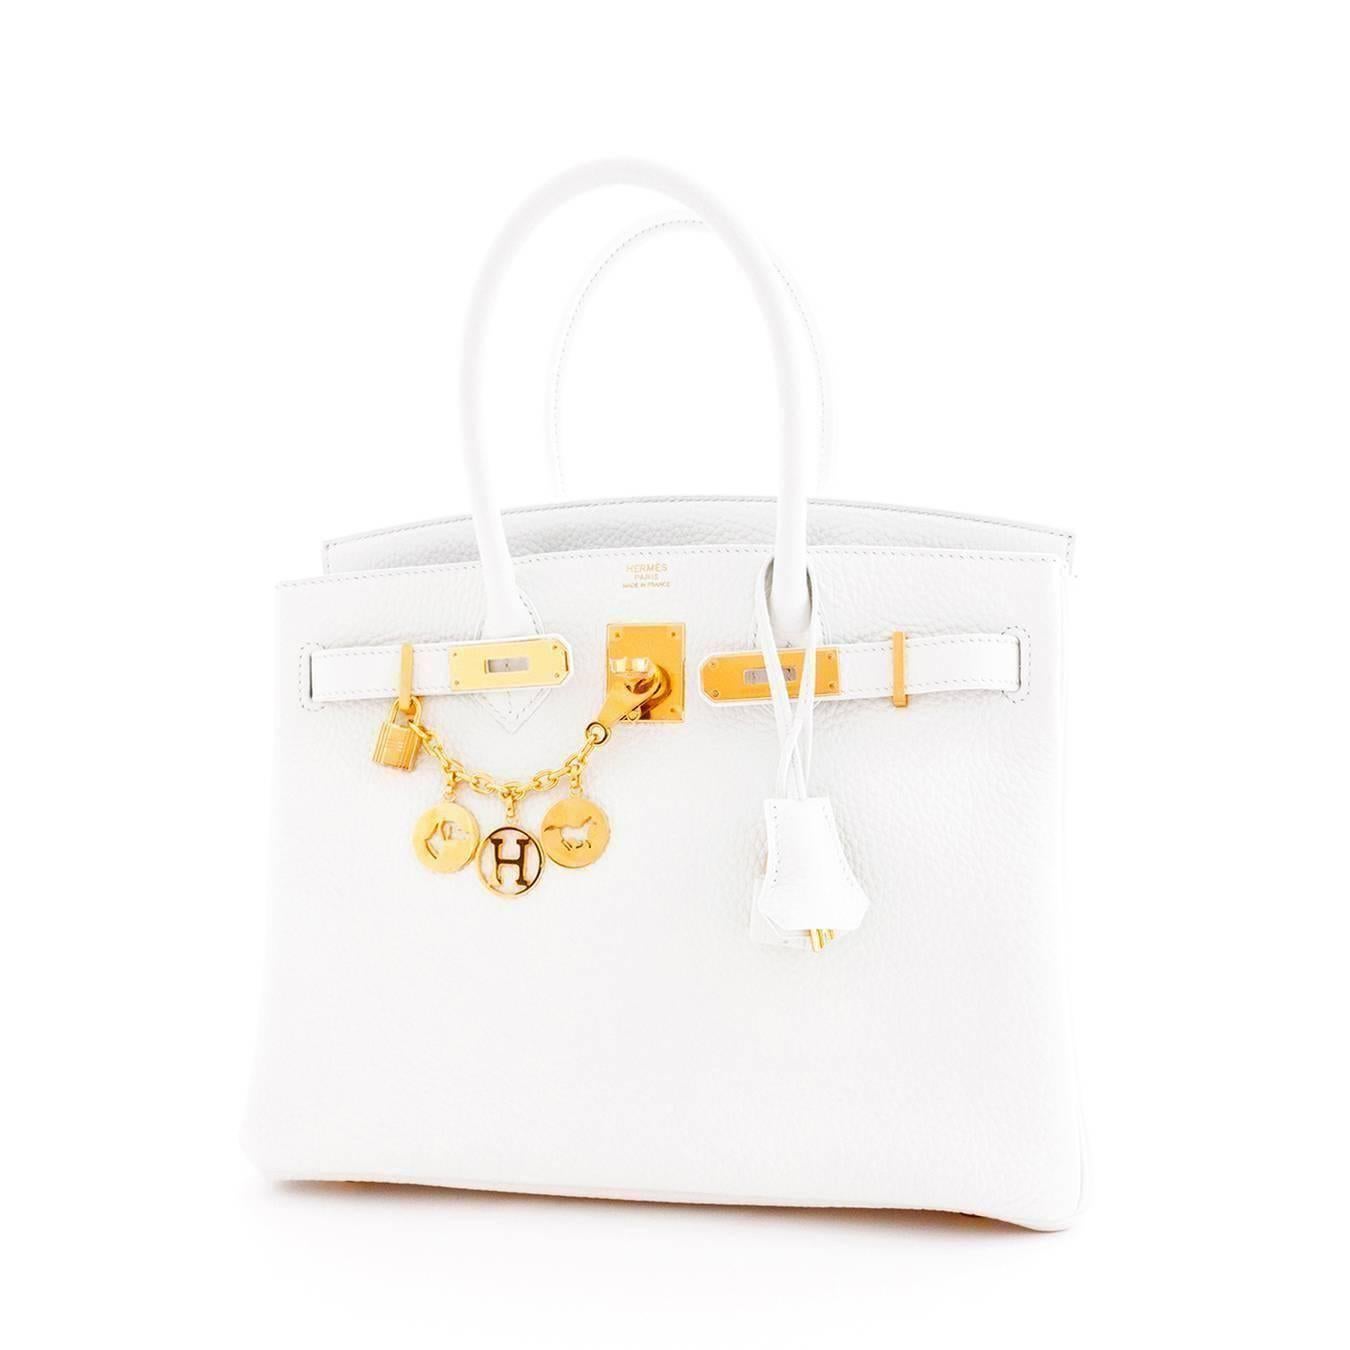 Hermes White Gold 30cm Birkin Bag GHW Rare Superb Summer
Brand New in Box. Store fresh in pristine condition (with plastic on hardware).
Comes with keys, lock, clochette, a sleeper for the bag, rain protector, Hermes ribbon, and original box. 